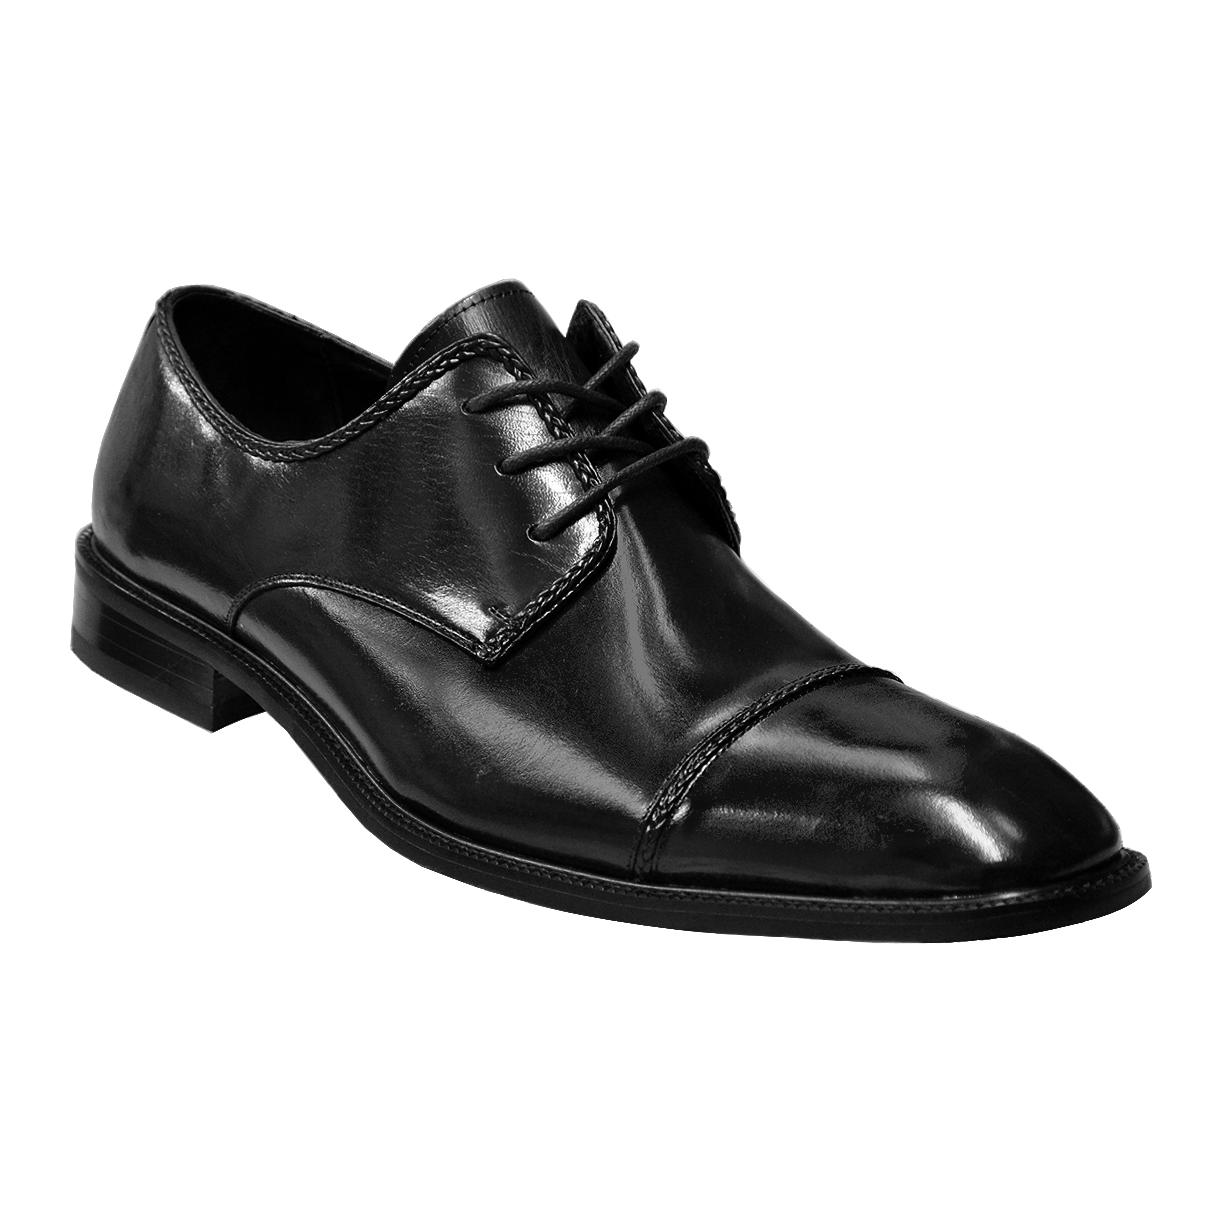 Stacy Adams Brayden Black Polished Genuine Leather Cap-Toe Shoes With ...